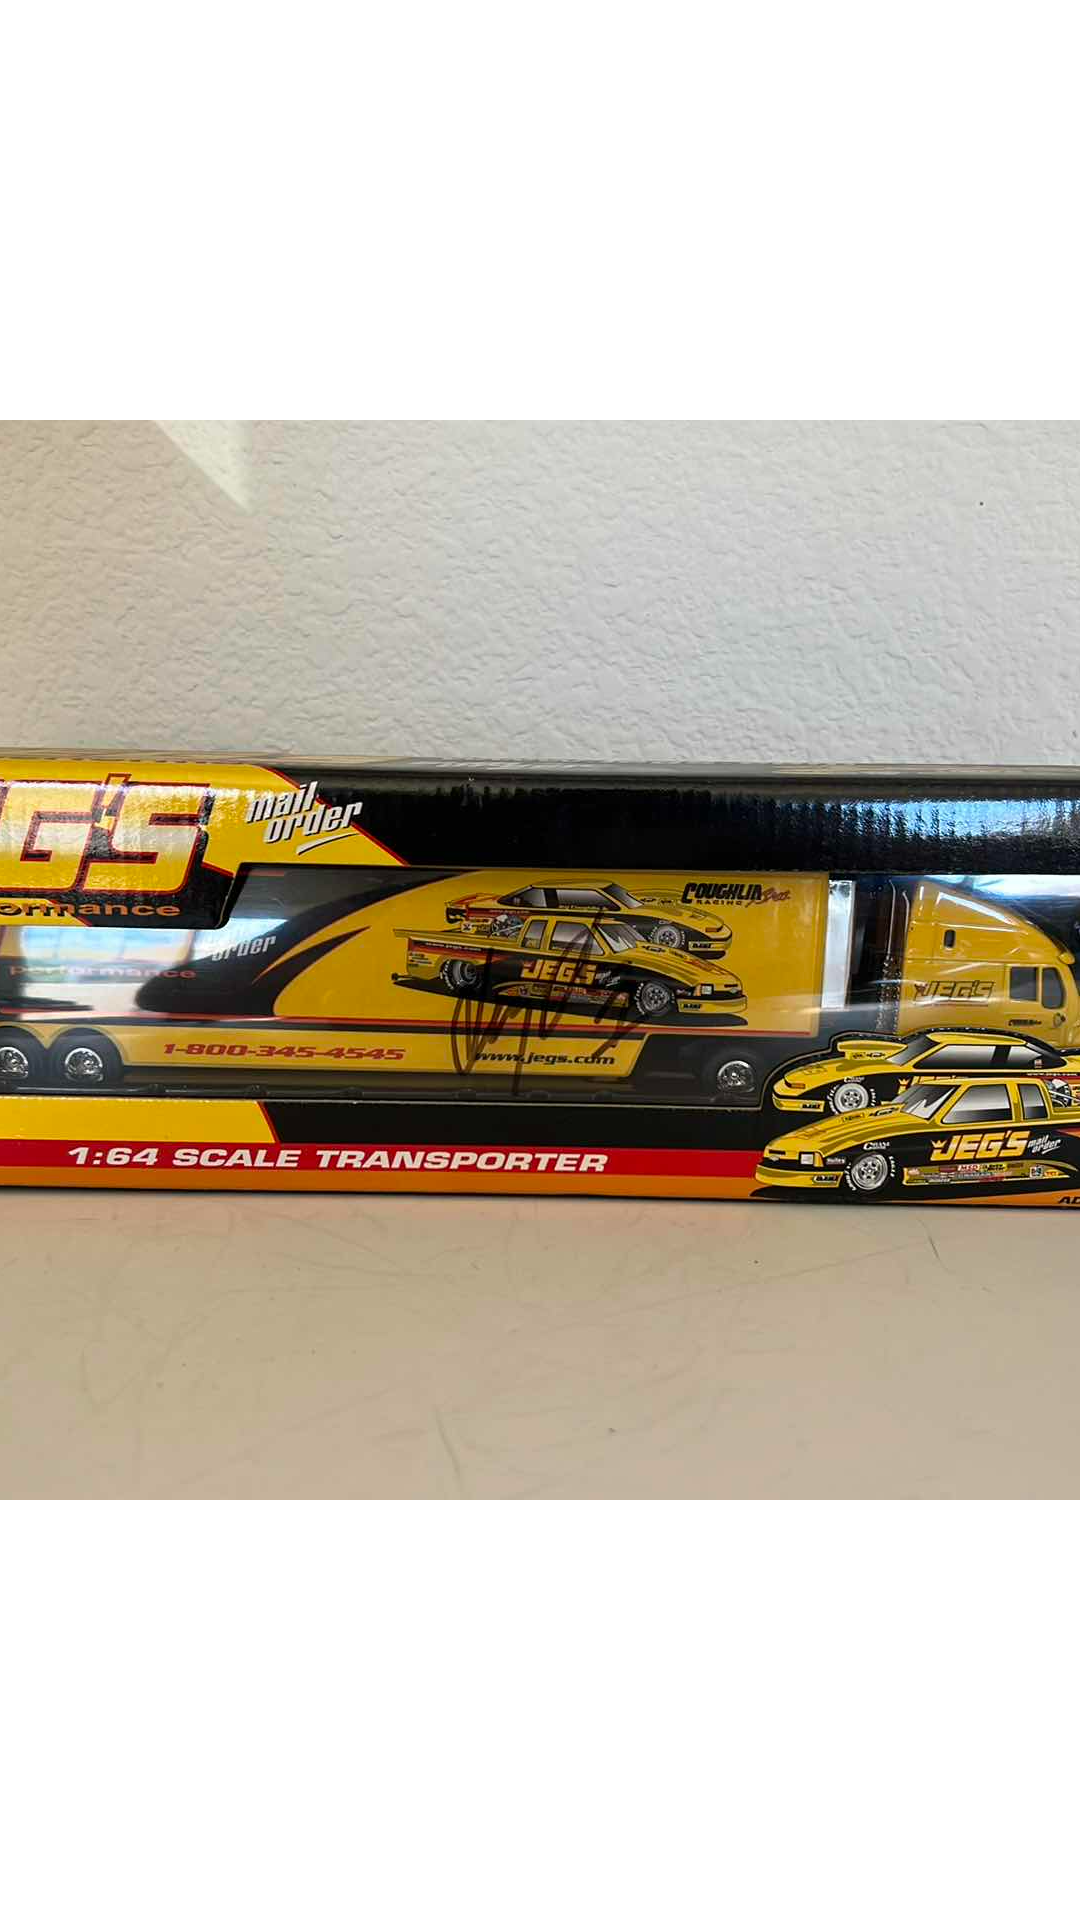 Photo 2 of SIGNED JEGS HIGH PERFORMANCE 1:6 SCALE TRANSPORTER TRAILER 1999 LIMITED EDITION COLLECTIBLE MODEL CAR